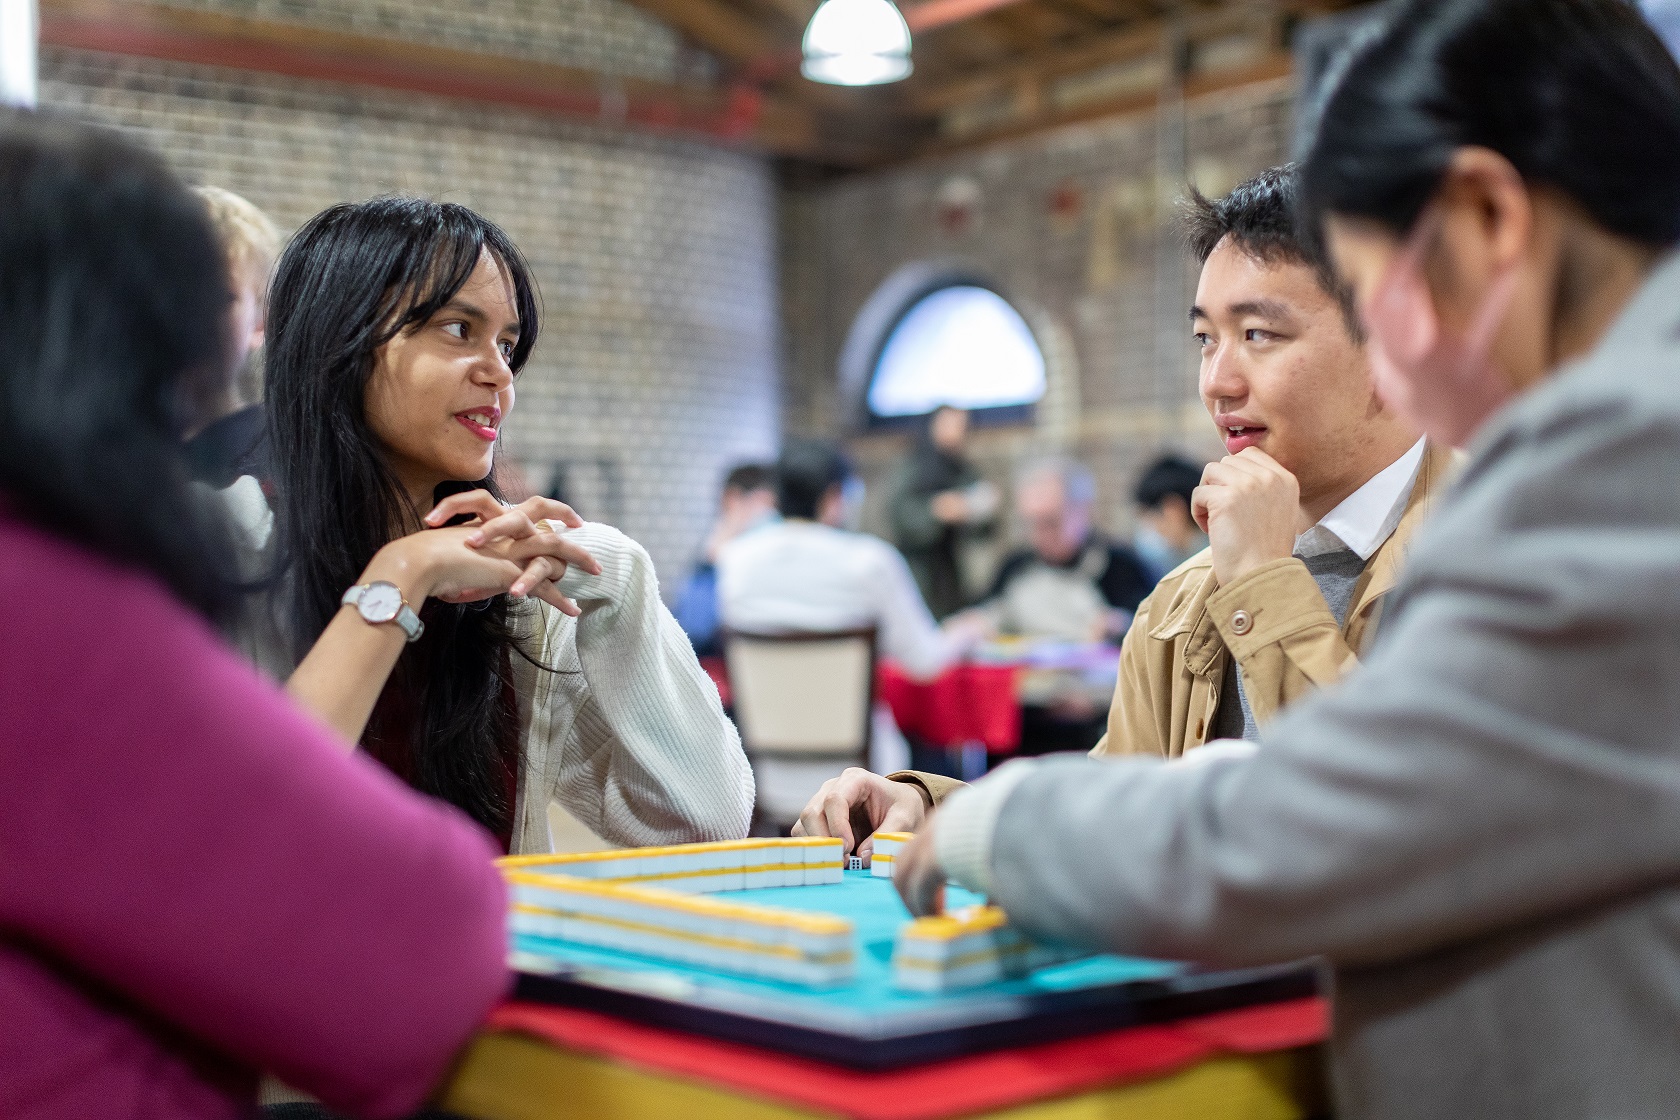 Four people gather around a table and are talking among themselves. One of them is moving one of the pieces of a brightly coloured game on the table.